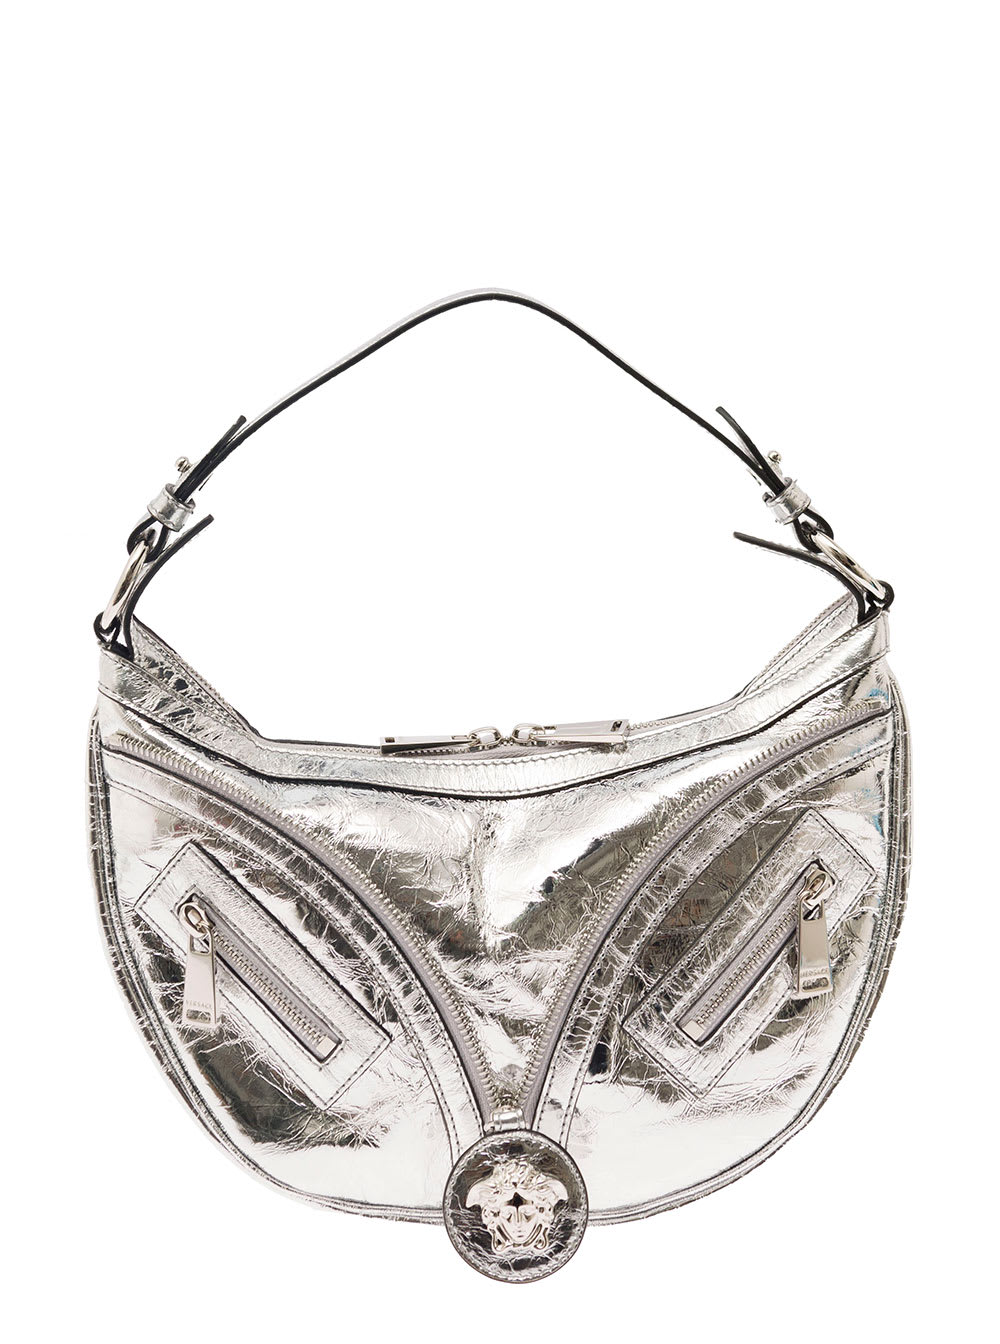 VERSACE HOBO SILVER HAND BAG WITH MEDUSA DETAIL IN LAMINATED LEATHER WOMAN